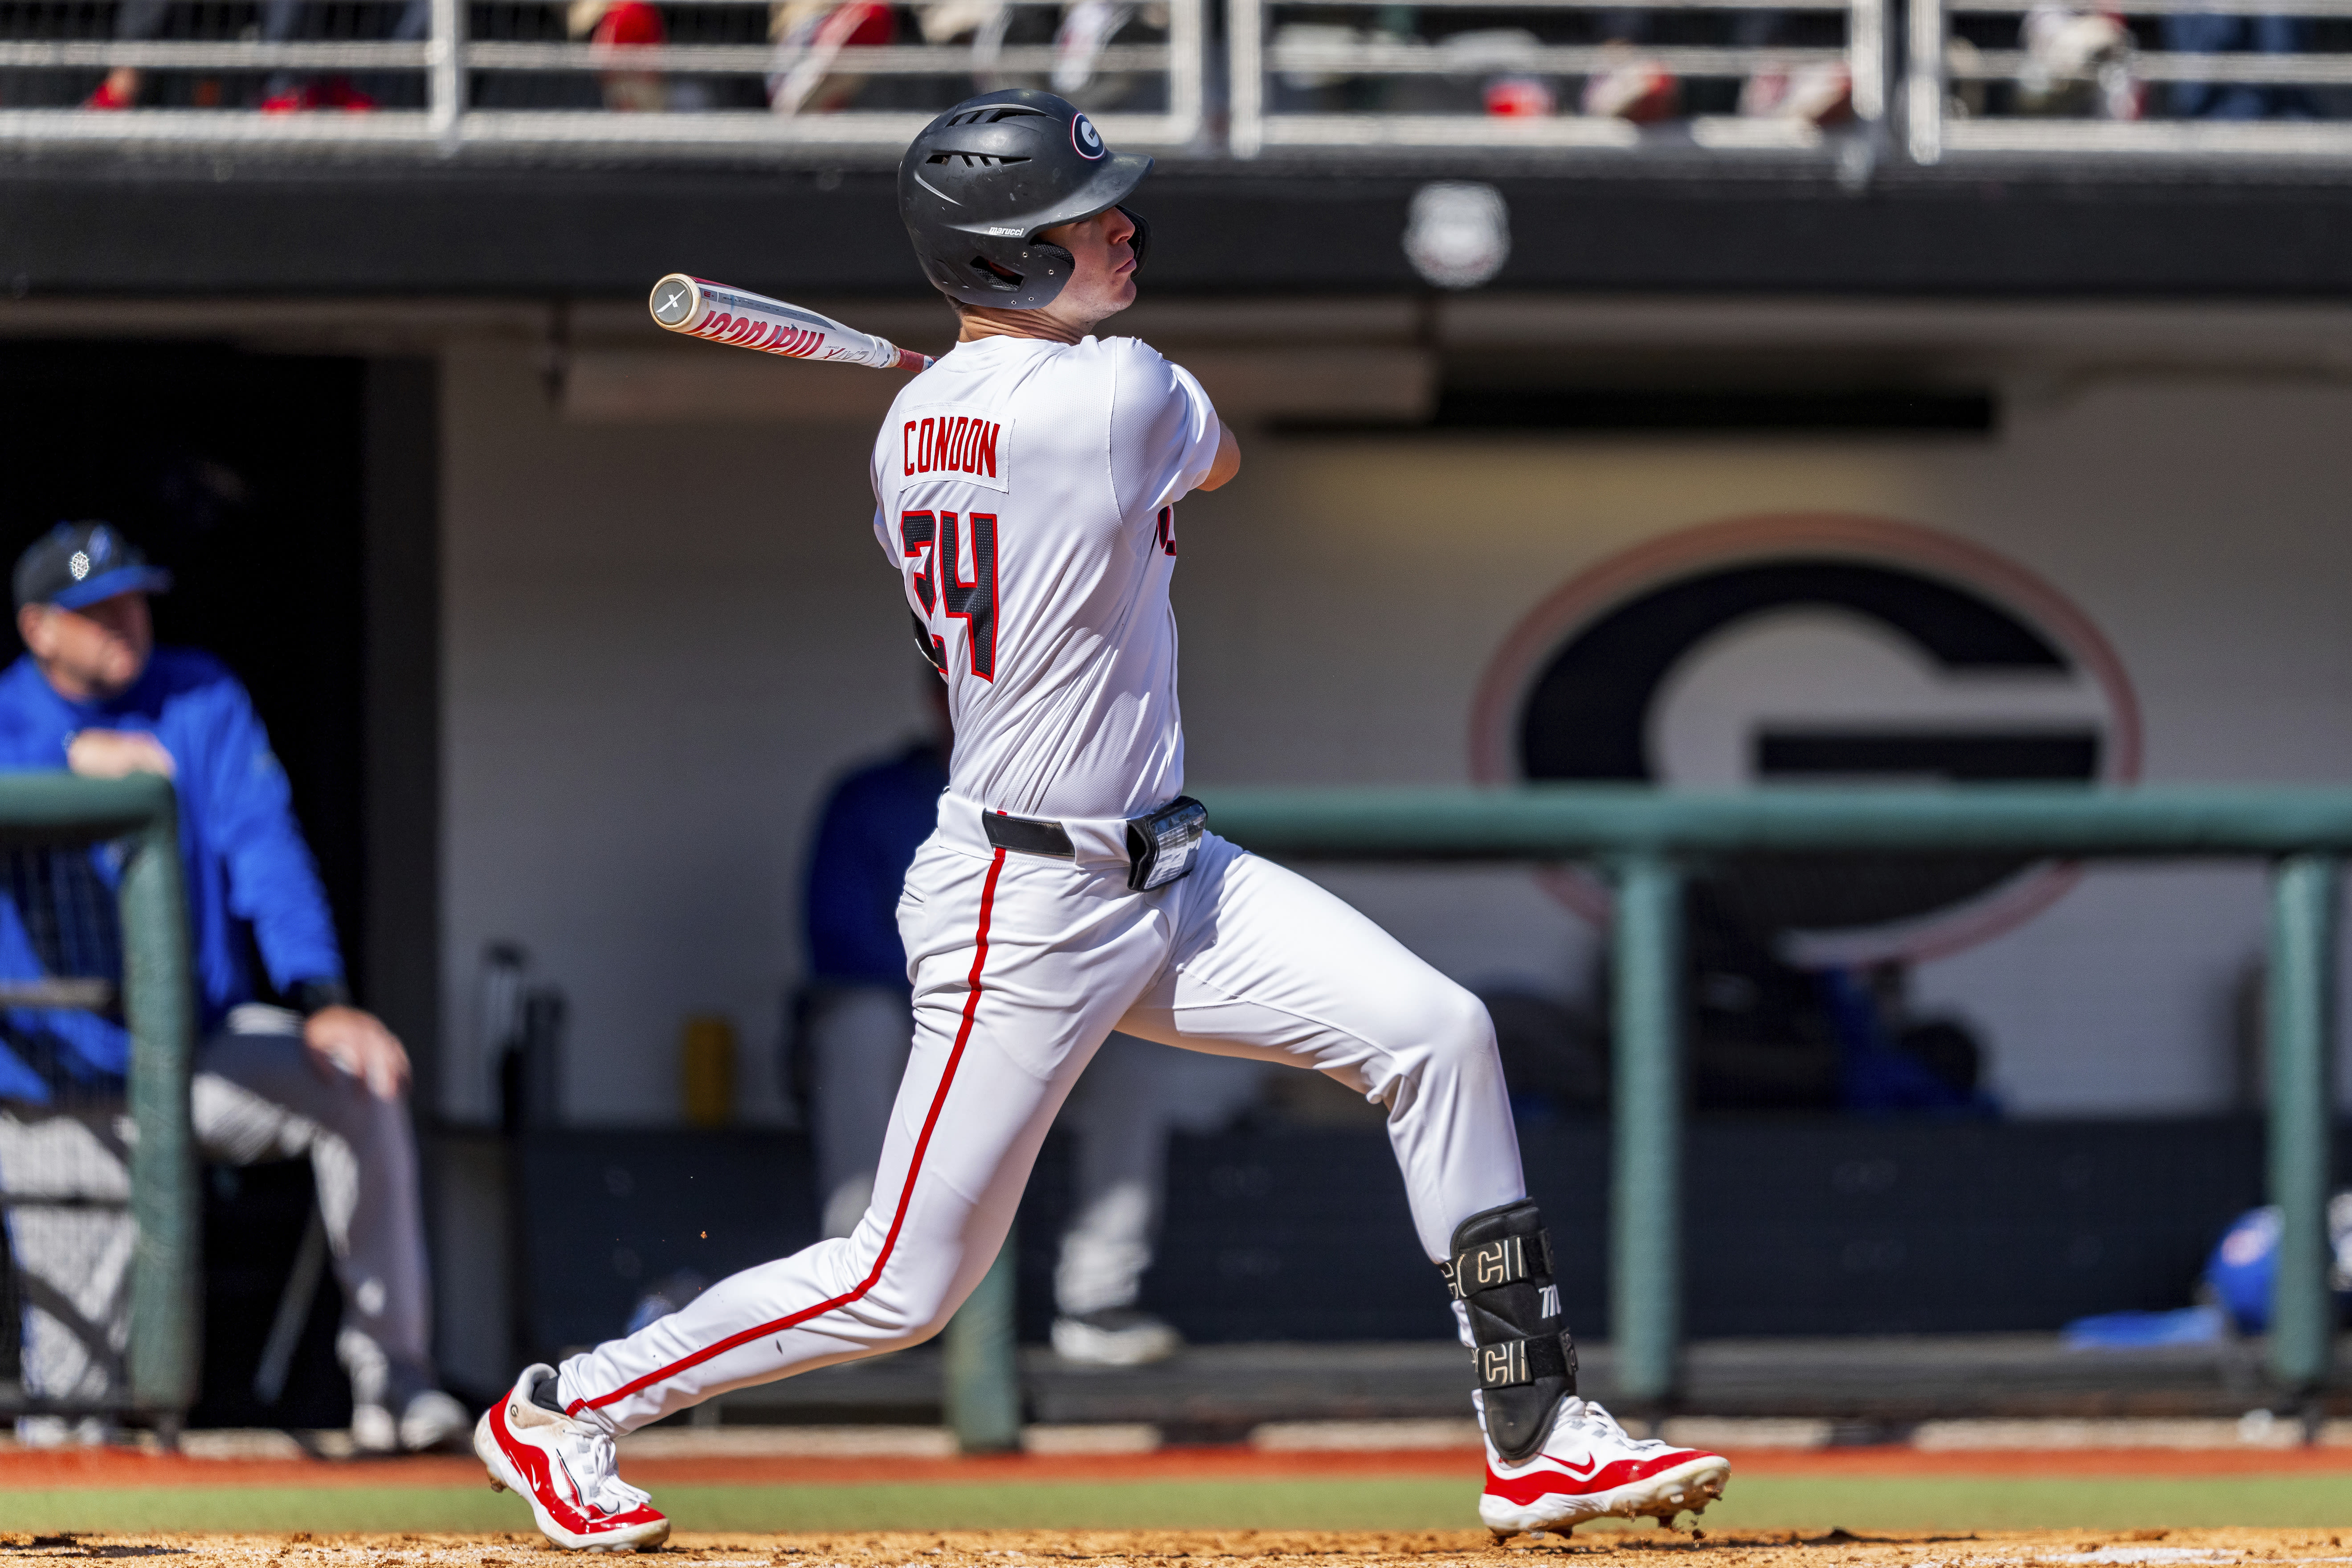 Georgia's Charlie Condon named SEC player of year; Smith is top pitcher and Mingione coach of year